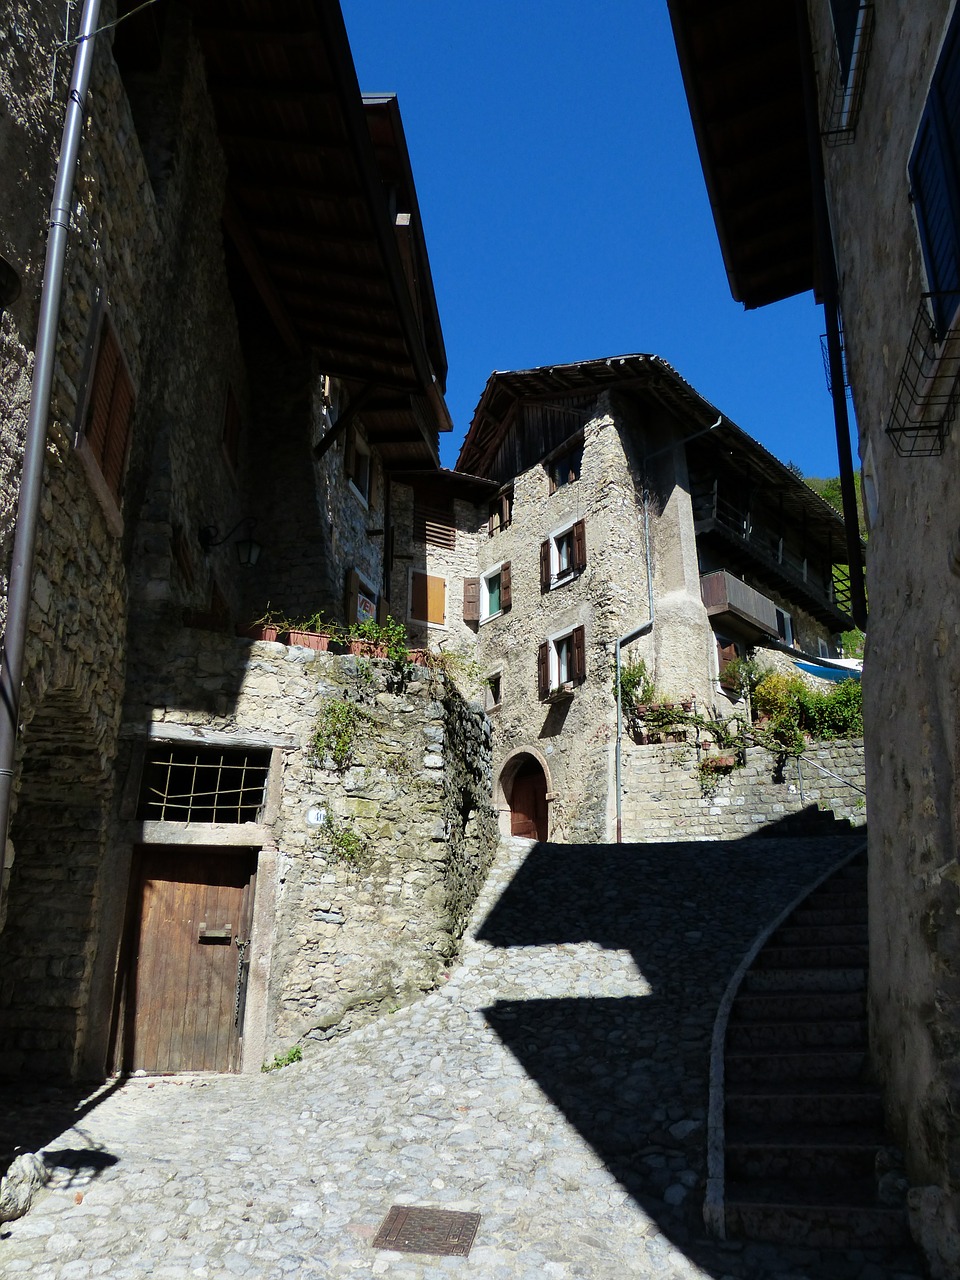 alley houses gorge medieval village free photo